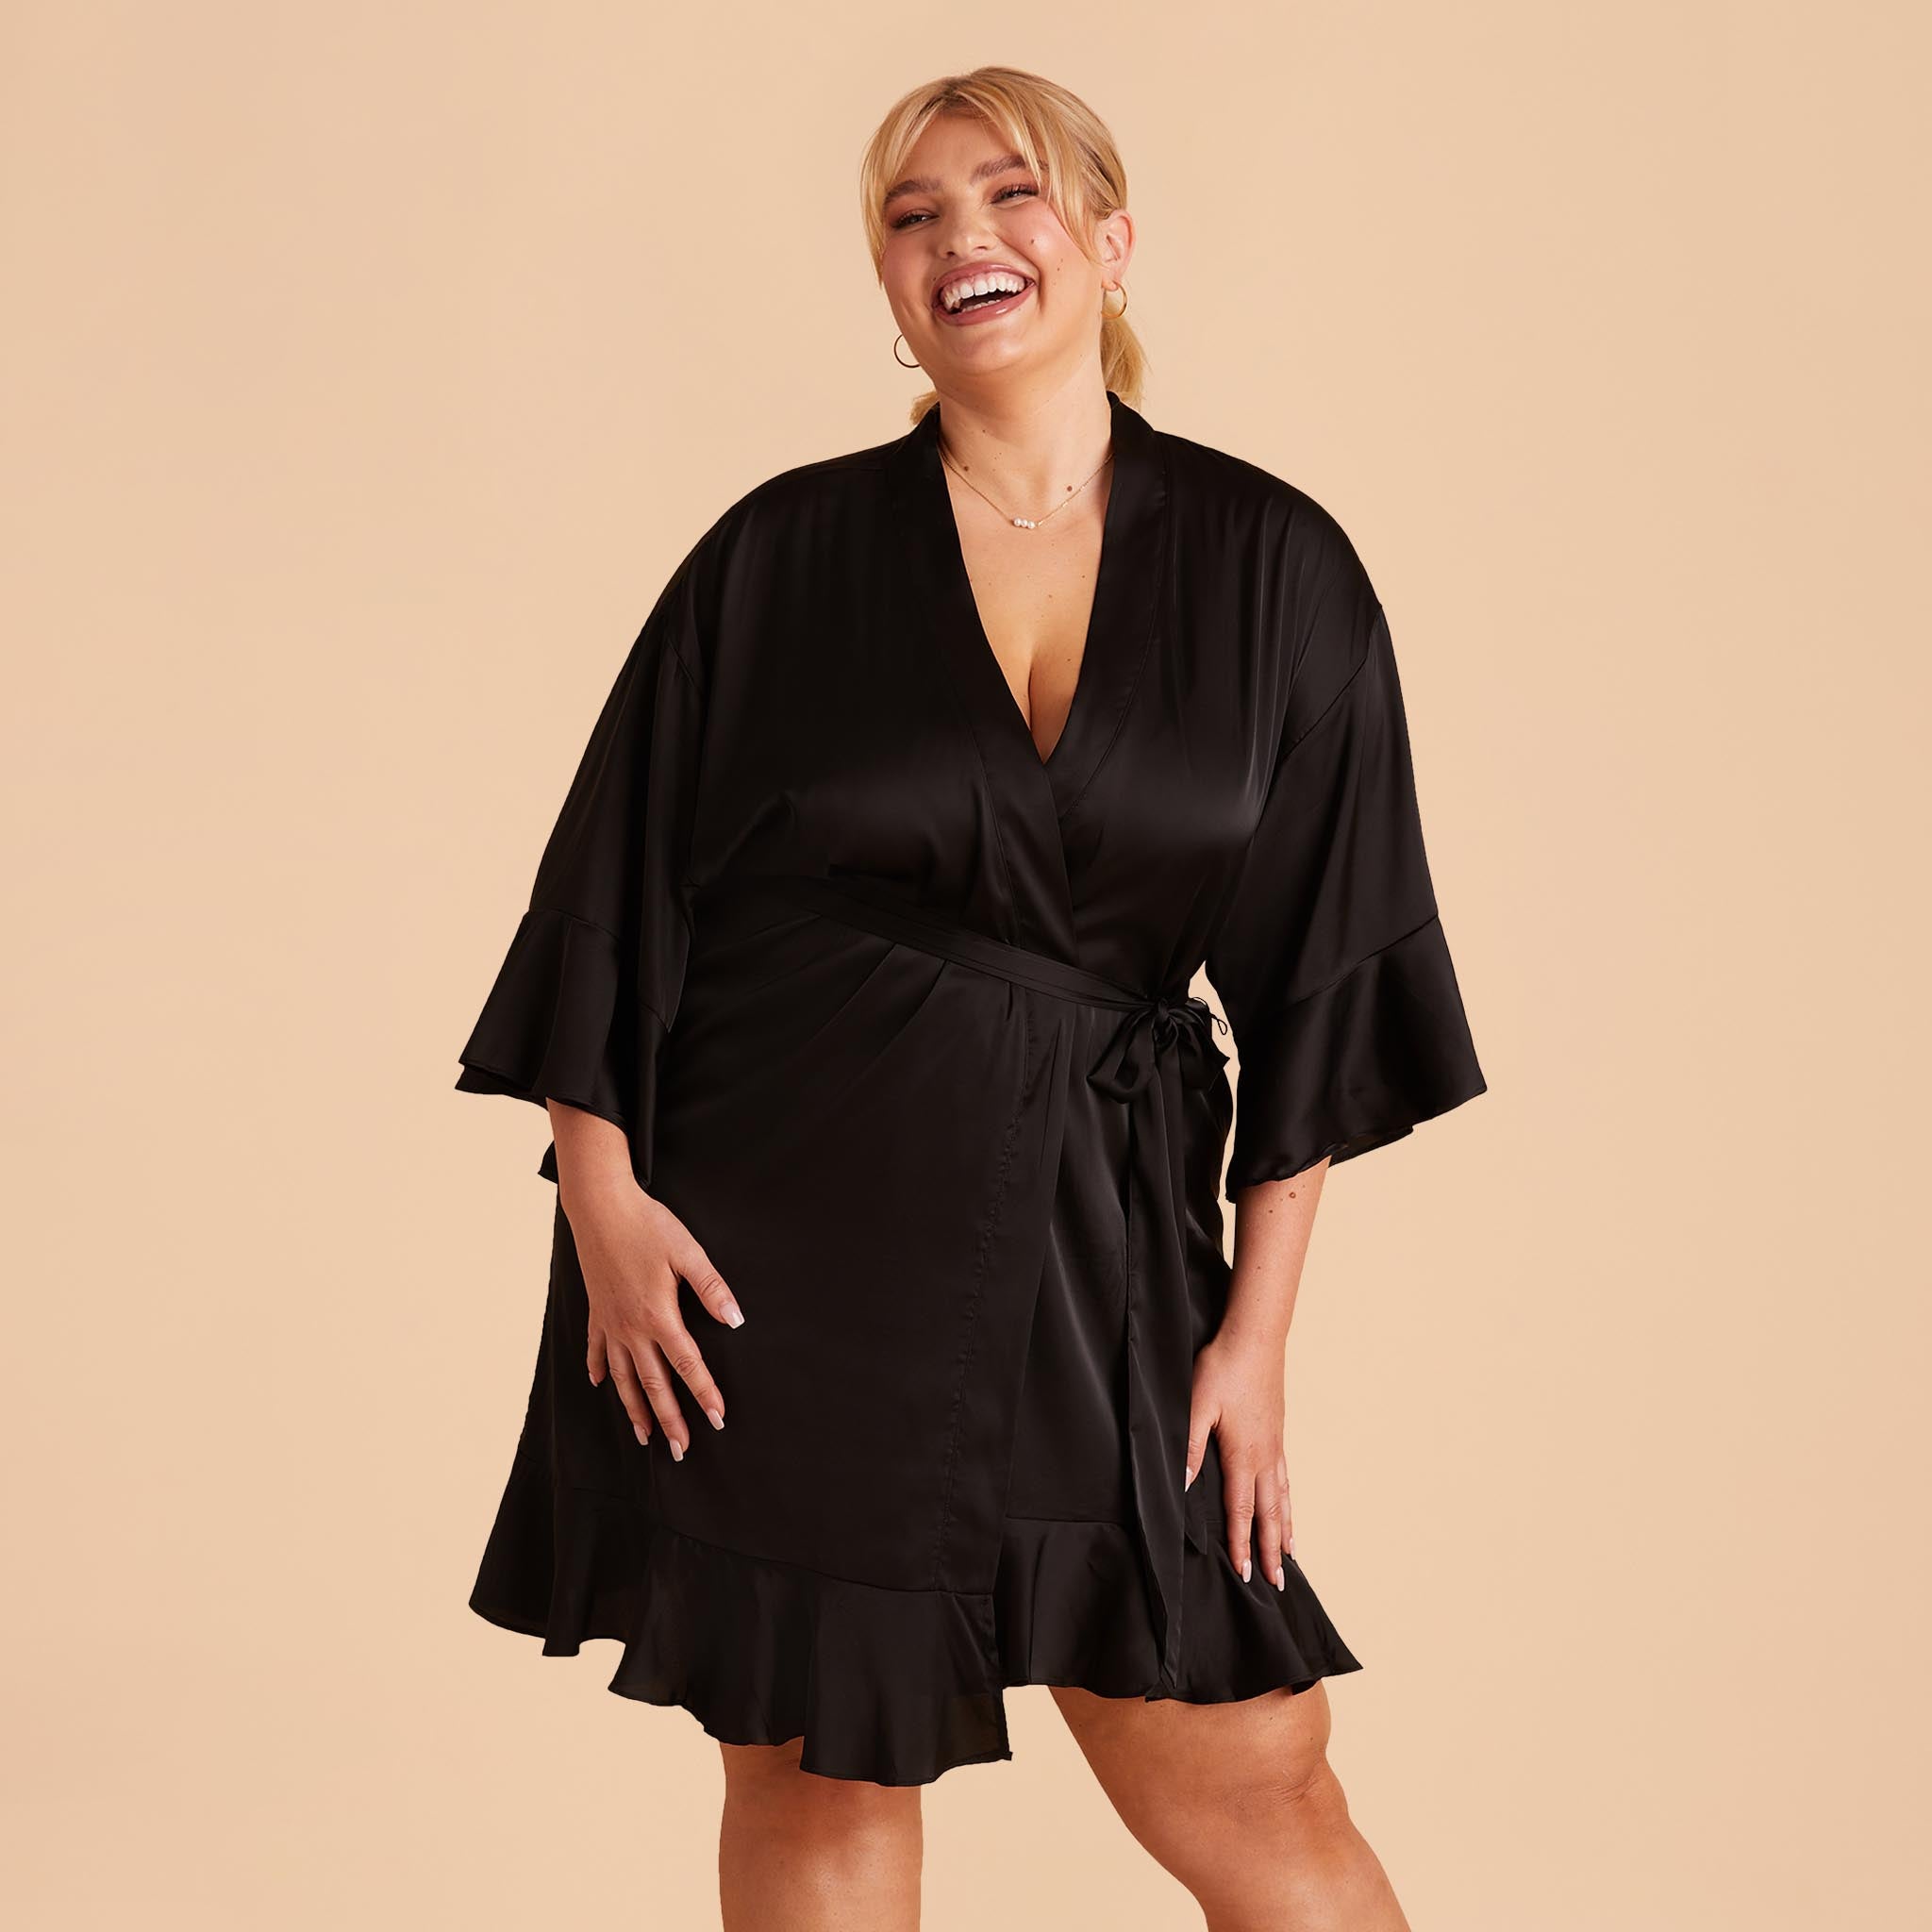 Kenny Ruffle Robe in black satin by Birdy Grey, front view